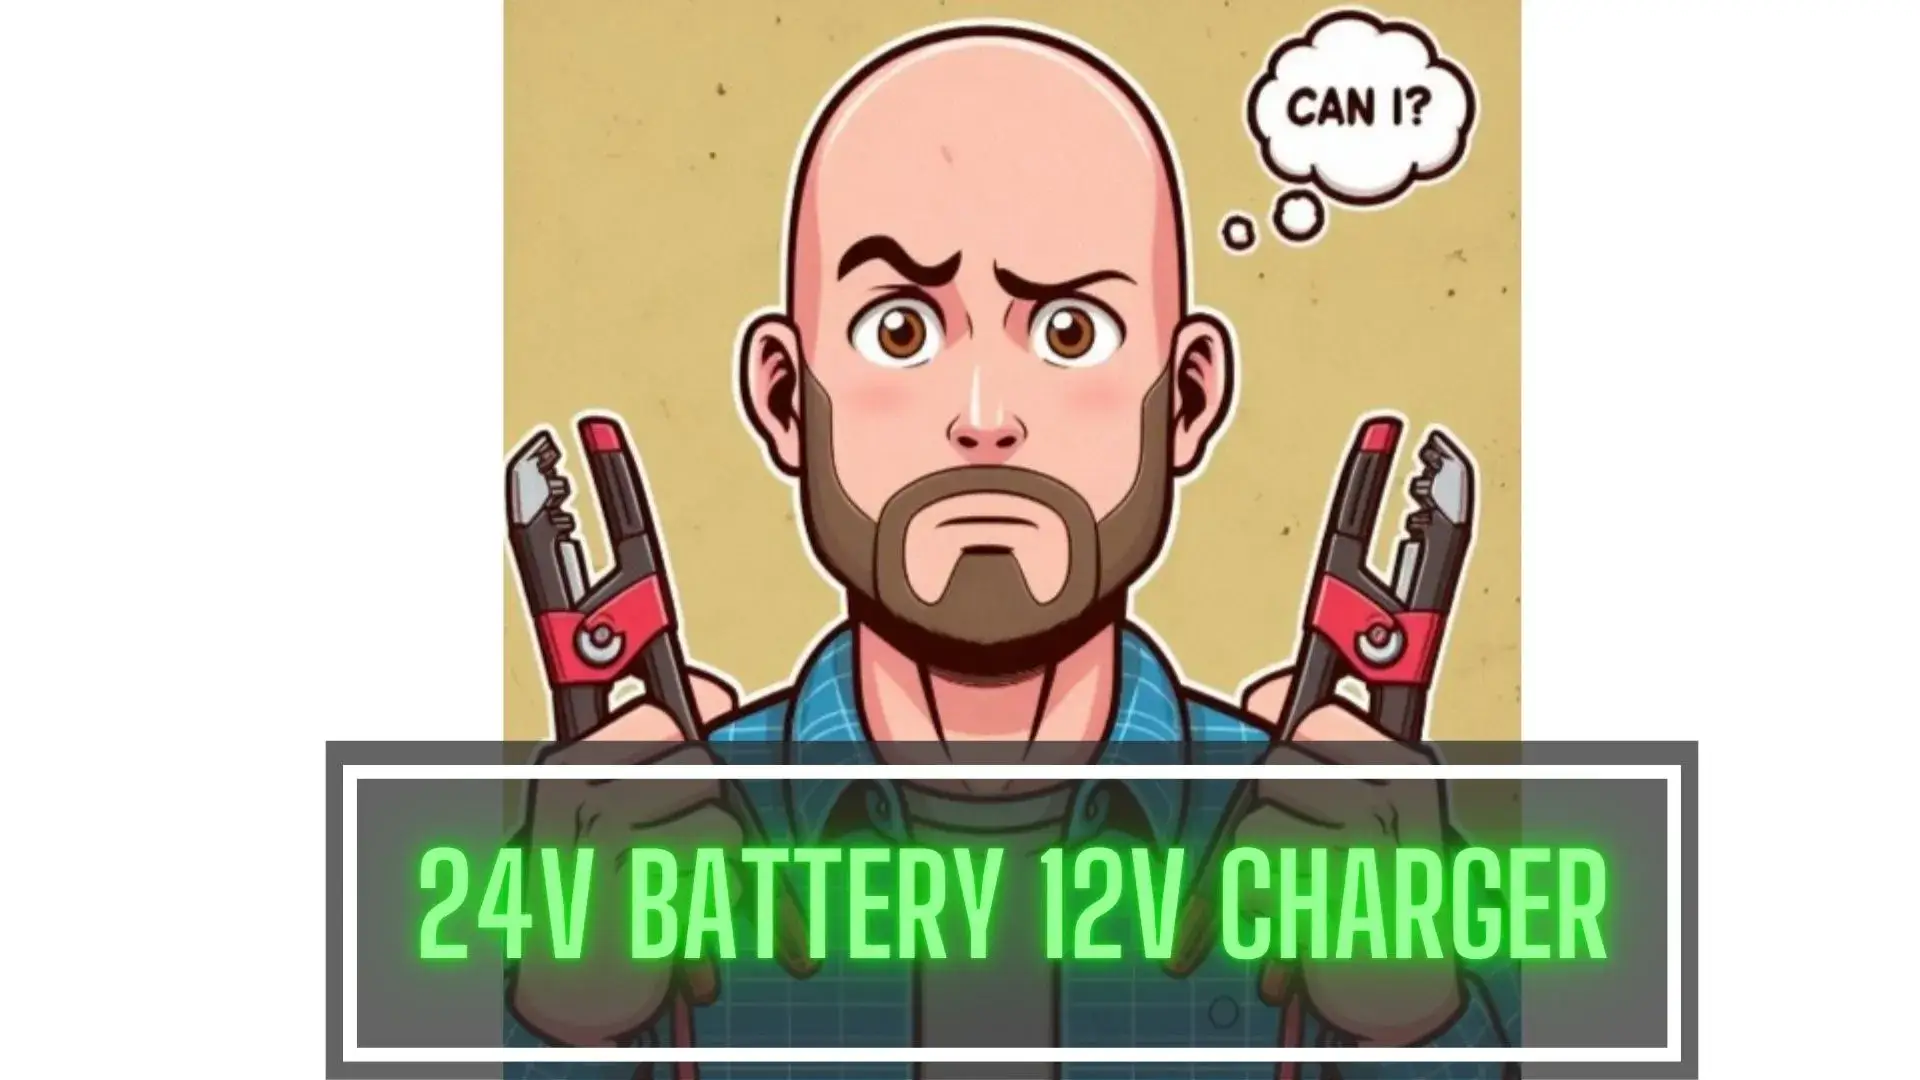 Can You Charge a 24-Volt Battery with a 12-Volt Charger